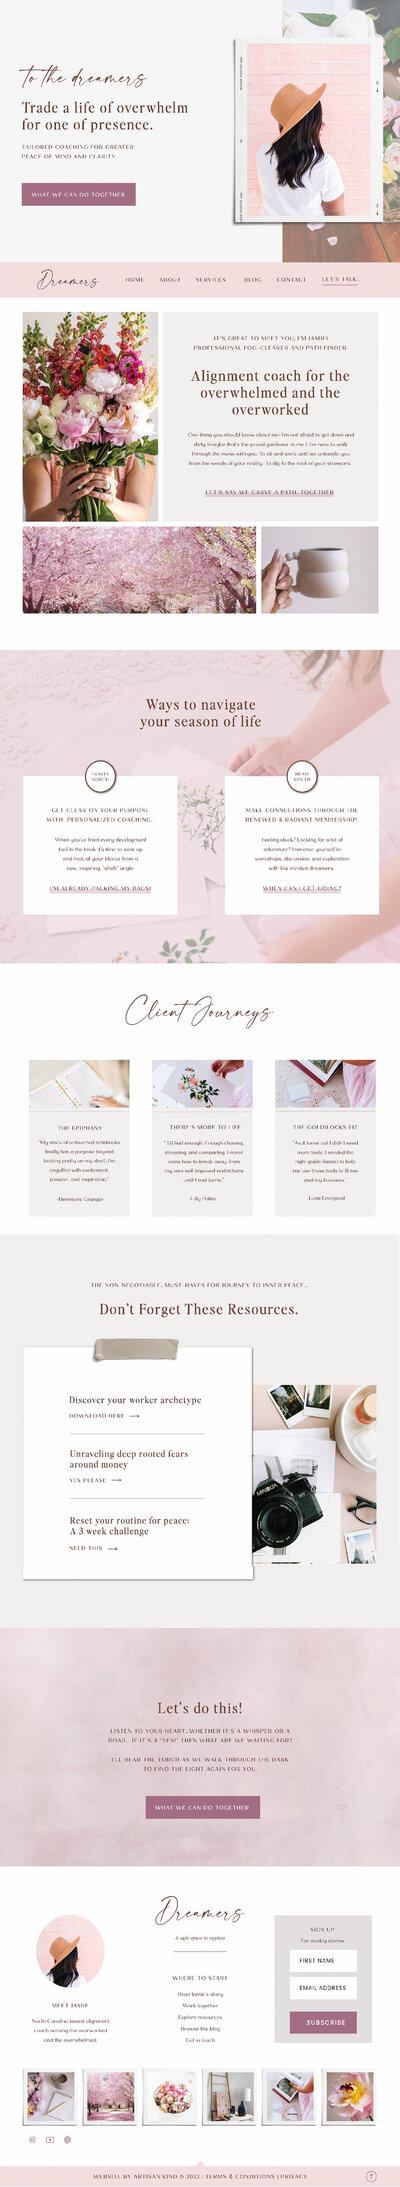 Artisan Kind Showit website template customized with a light pink and magenta color palette